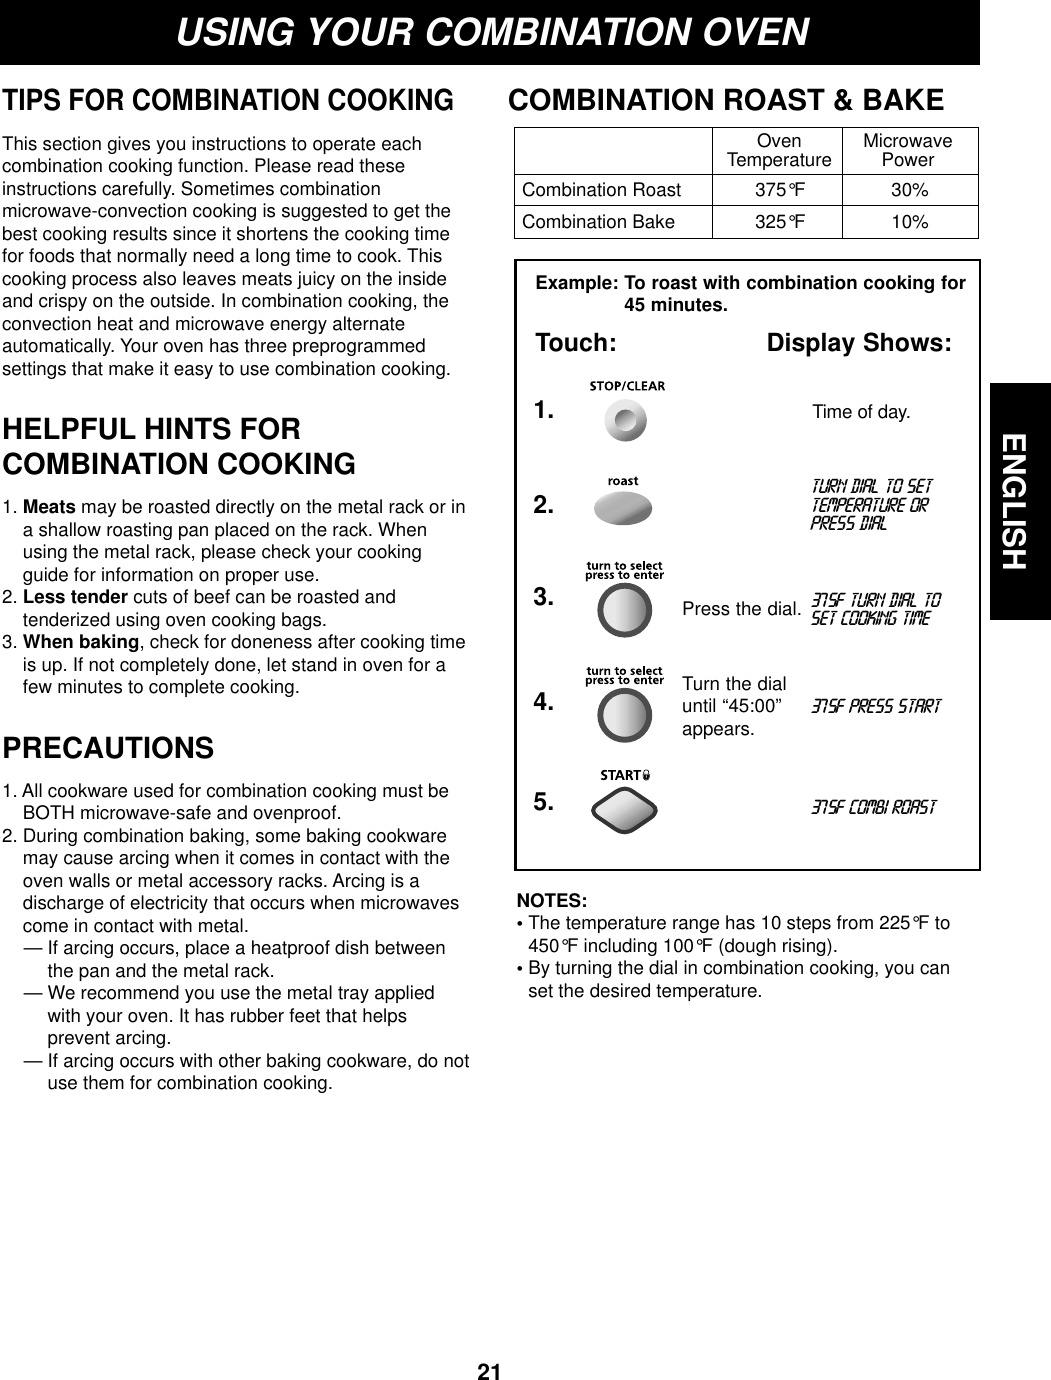 ENGLISH21USING YOUR COMBINATION OVENTIPS FOR COMBINATION COOKINGThis section gives you instructions to operate eachcombination cooking function. Please read theseinstructions carefully. Sometimes combinationmicrowave-convection cooking is suggested to get thebest cooking results since it shortens the cooking timefor foods that normally need a long time to cook. Thiscooking process also leaves meats juicy on the insideand crispy on the outside. In combination cooking, theconvection heat and microwave energy alternateautomatically. Your oven has three preprogrammedsettings that make it easy to use combination cooking.HELPFUL HINTS FORCOMBINATION COOKING1. Meats may be roasted directly on the metal rack or ina shallow roasting pan placed on the rack. Whenusing the metal rack, please check your cookingguide for information on proper use.2. Less tender cuts of beef can be roasted andtenderized using oven cooking bags. 3. When baking, check for doneness after cooking timeis up. If not completely done, let stand in oven for afew minutes to complete cooking.PRECAUTIONS1. All cookware used for combination cooking must beBOTH microwave-safe and ovenproof.2. During combination baking, some baking cookwaremay cause arcing when it comes in contact with theoven walls or metal accessory racks. Arcing is adischarge of electricity that occurs when microwavescome in contact with metal.— If arcing occurs, place a heatproof dish betweenthe pan and the metal rack.— We recommend you use the metal tray appliedwith your oven. It has rubber feet that helpsprevent arcing.— If arcing occurs with other baking cookware, do notuse them for combination cooking.COMBINATION ROAST &amp; BAKEOven MicrowaveTemperature PowerCombination Roast 375°F 30%Combination Bake 325°F 10%Example: To roast with combination cooking for45 minutes.Touch: Display Shows:Time of day.1.turn dial to settemperature orpress dial2.375f turn dial toset cooking time3.375f combi roast5.Press the dial.375f press start4. Turn the dialuntil “45:00”appears.NOTES:• The temperature range has 10 steps from 225°F to450°F including 100°F (dough rising).• By turning the dial in combination cooking, you canset the desired temperature.